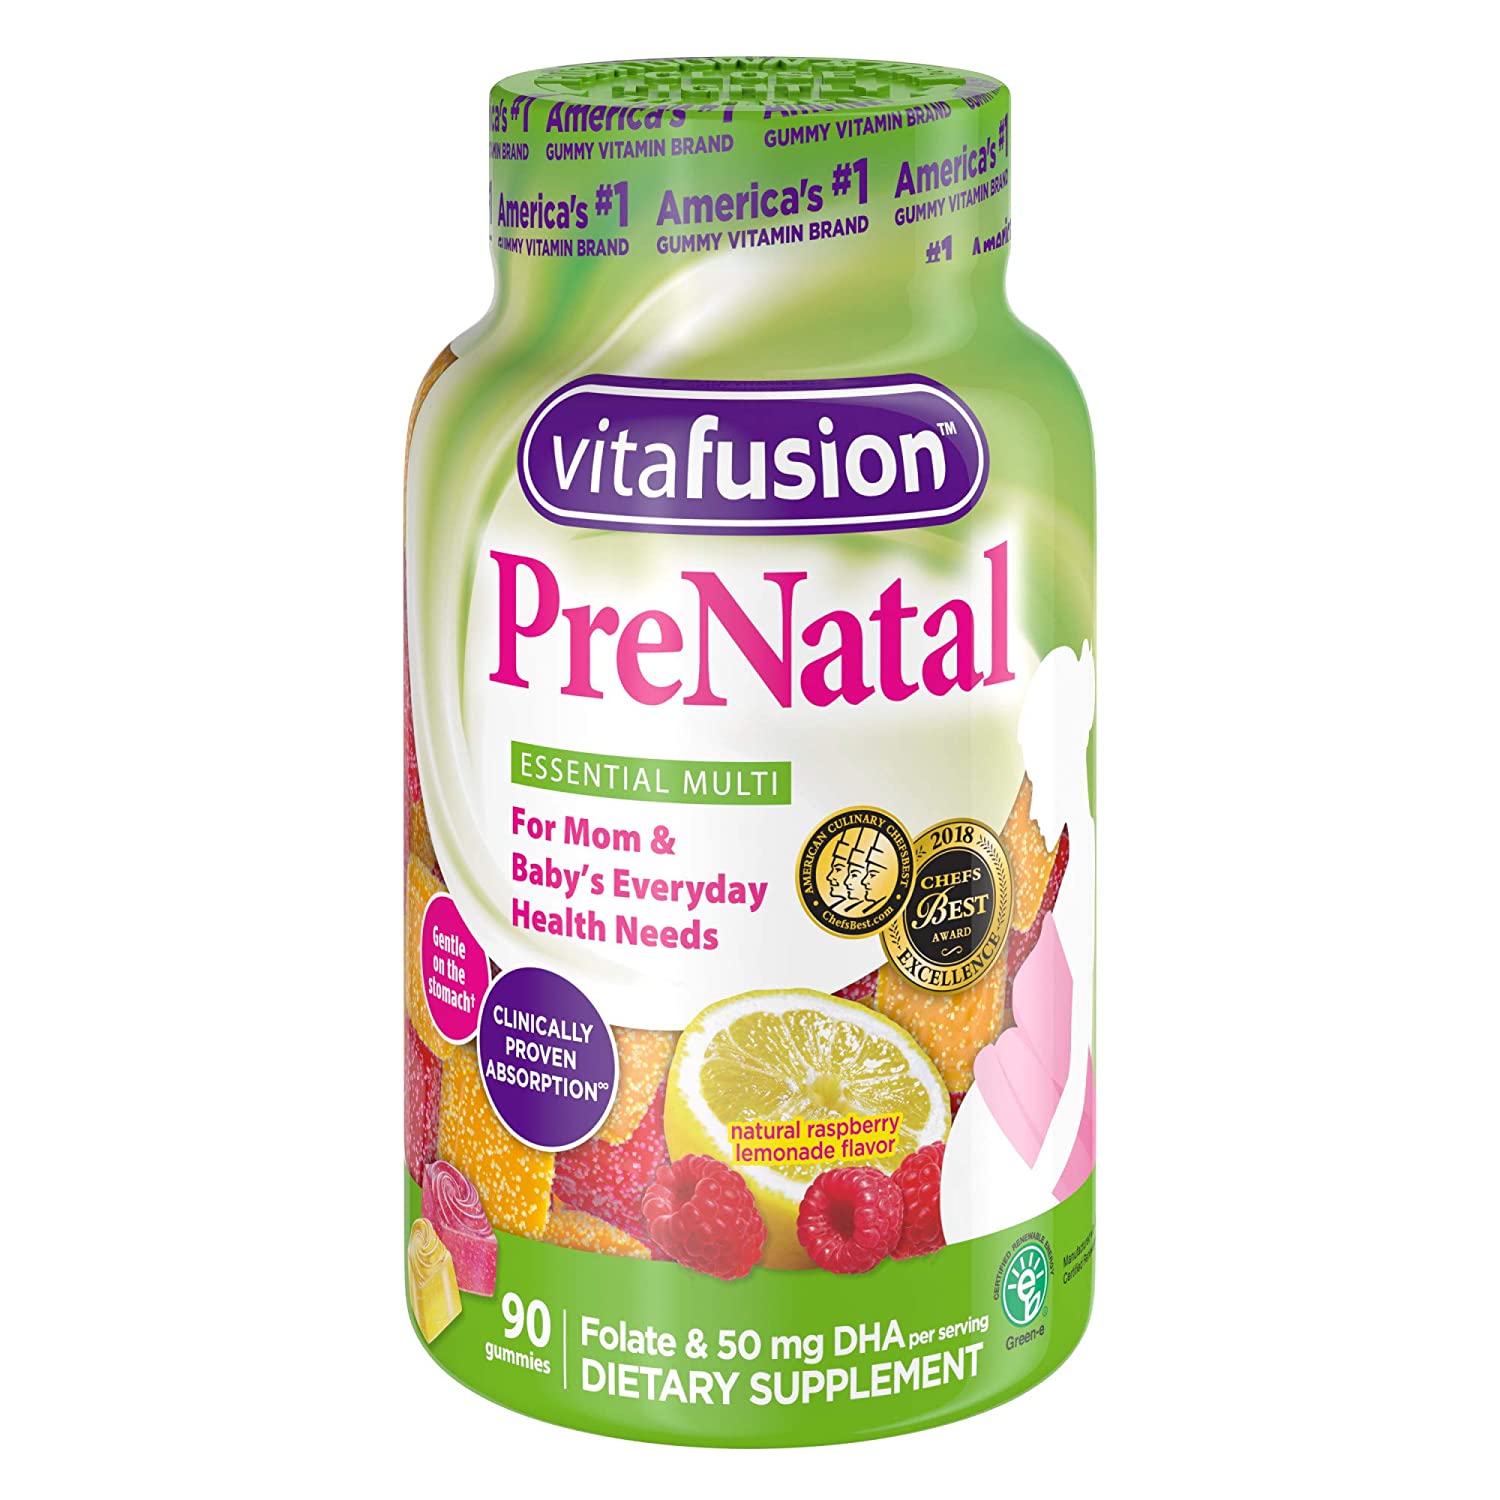 Top 9 Best Prenatal Vitamins with DHA for Pregnancy Reviews in 2022 7